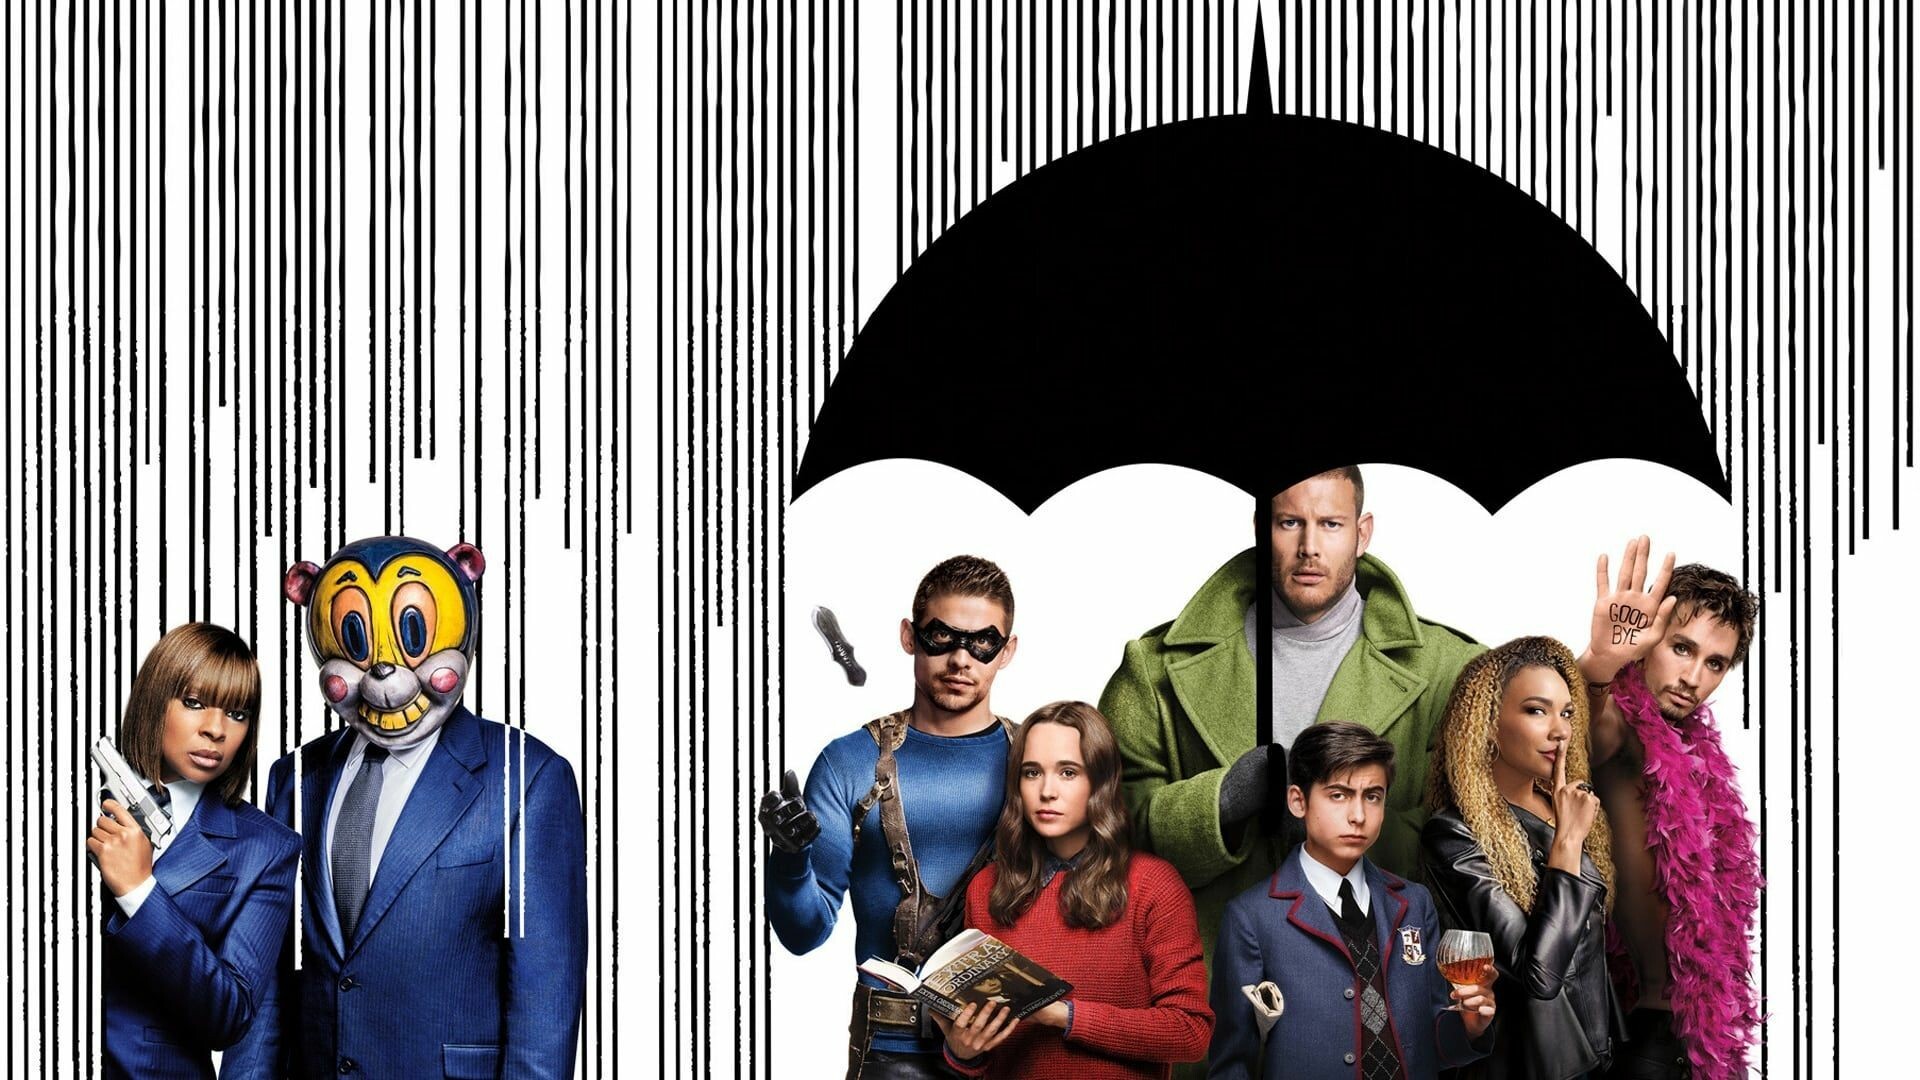 The Umbrella Academy: Netflix's series, Based on short comics by My Chemical Romance. 1920x1080 Full HD Background.